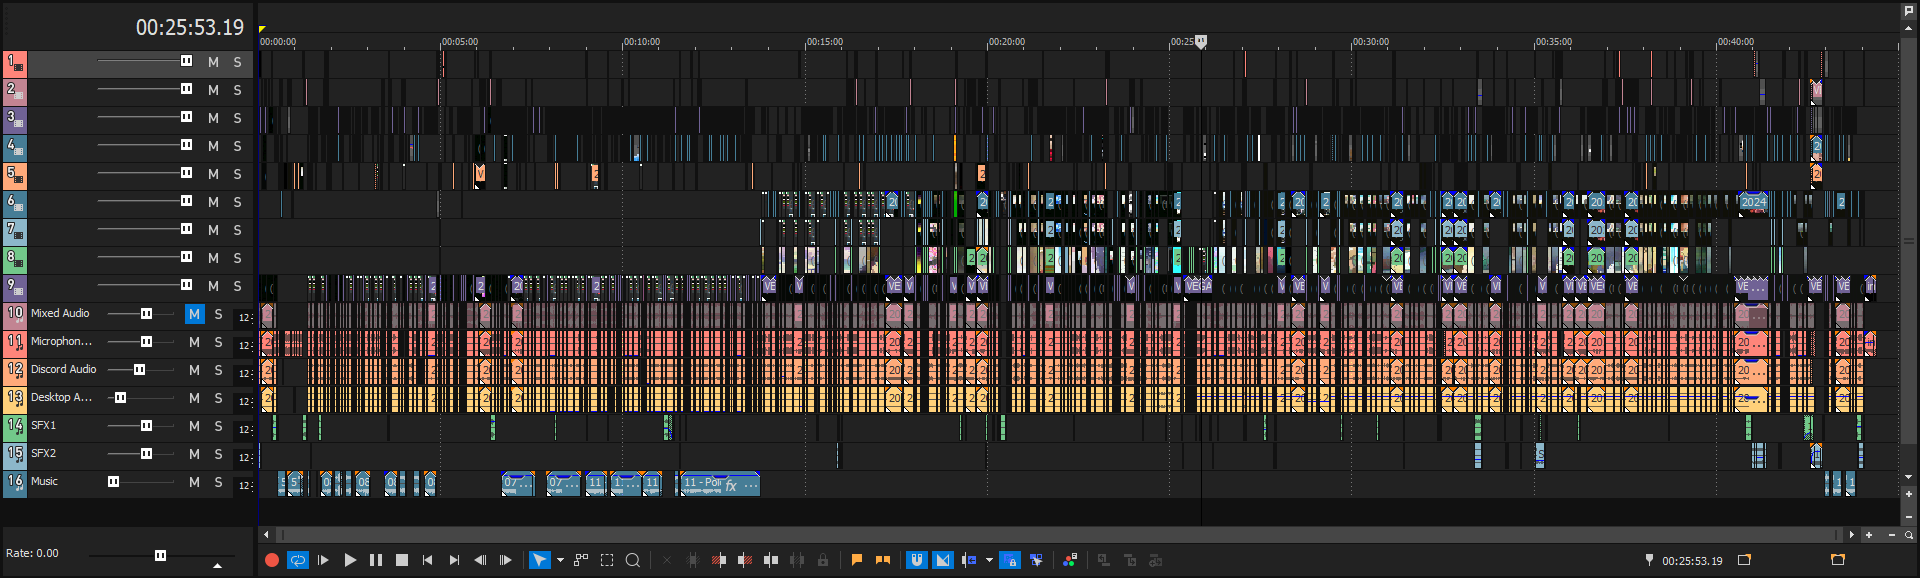 A video editing timeline background image.